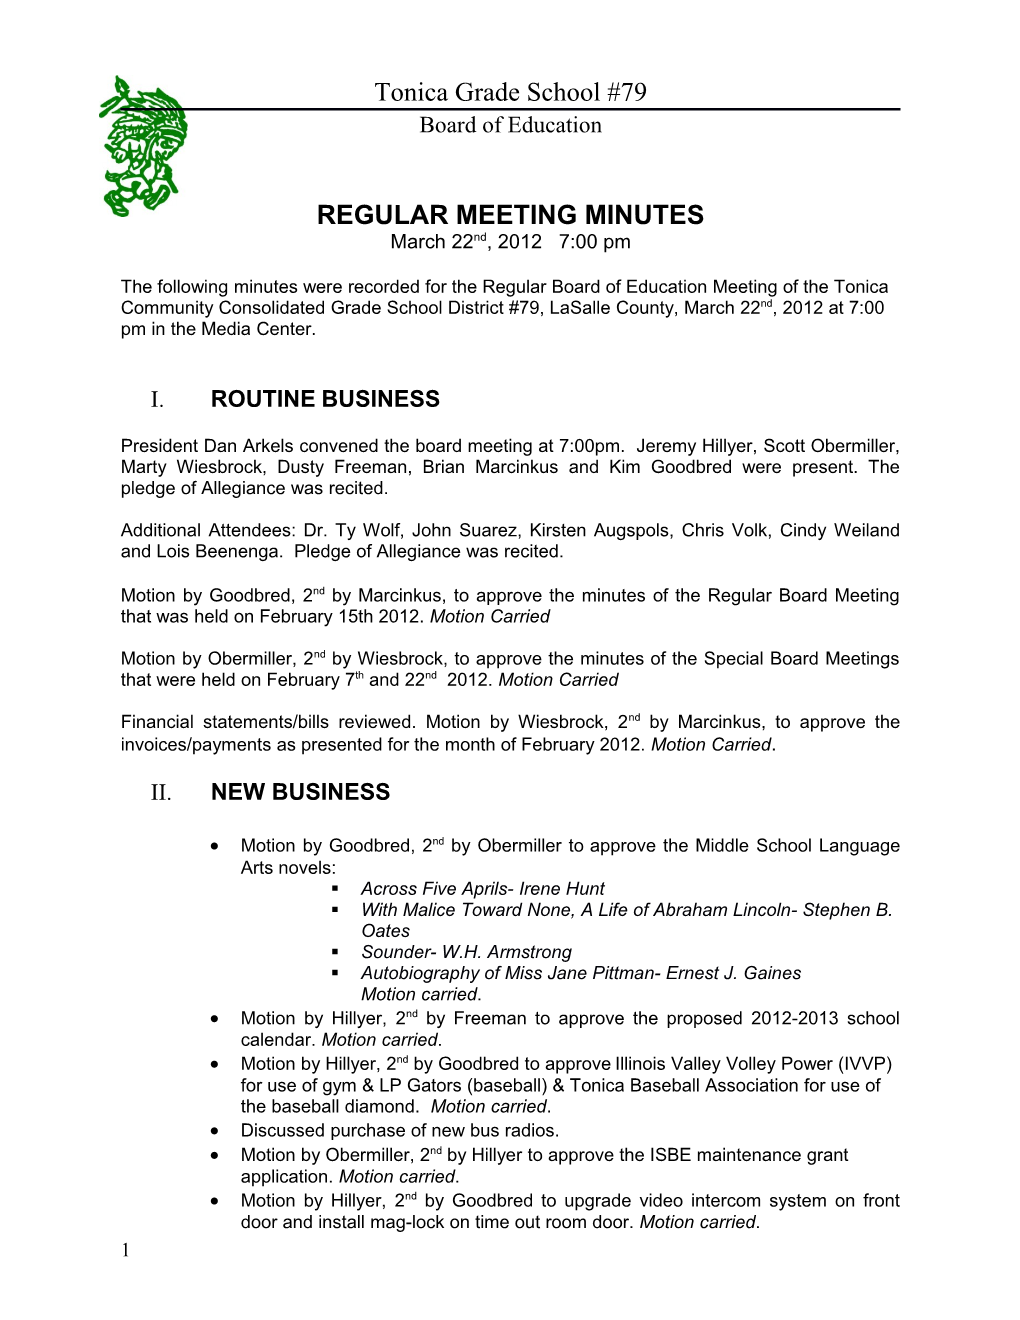 The Following Minutes Were Recorded for the Regular Board of Education Meeting of He Tonica